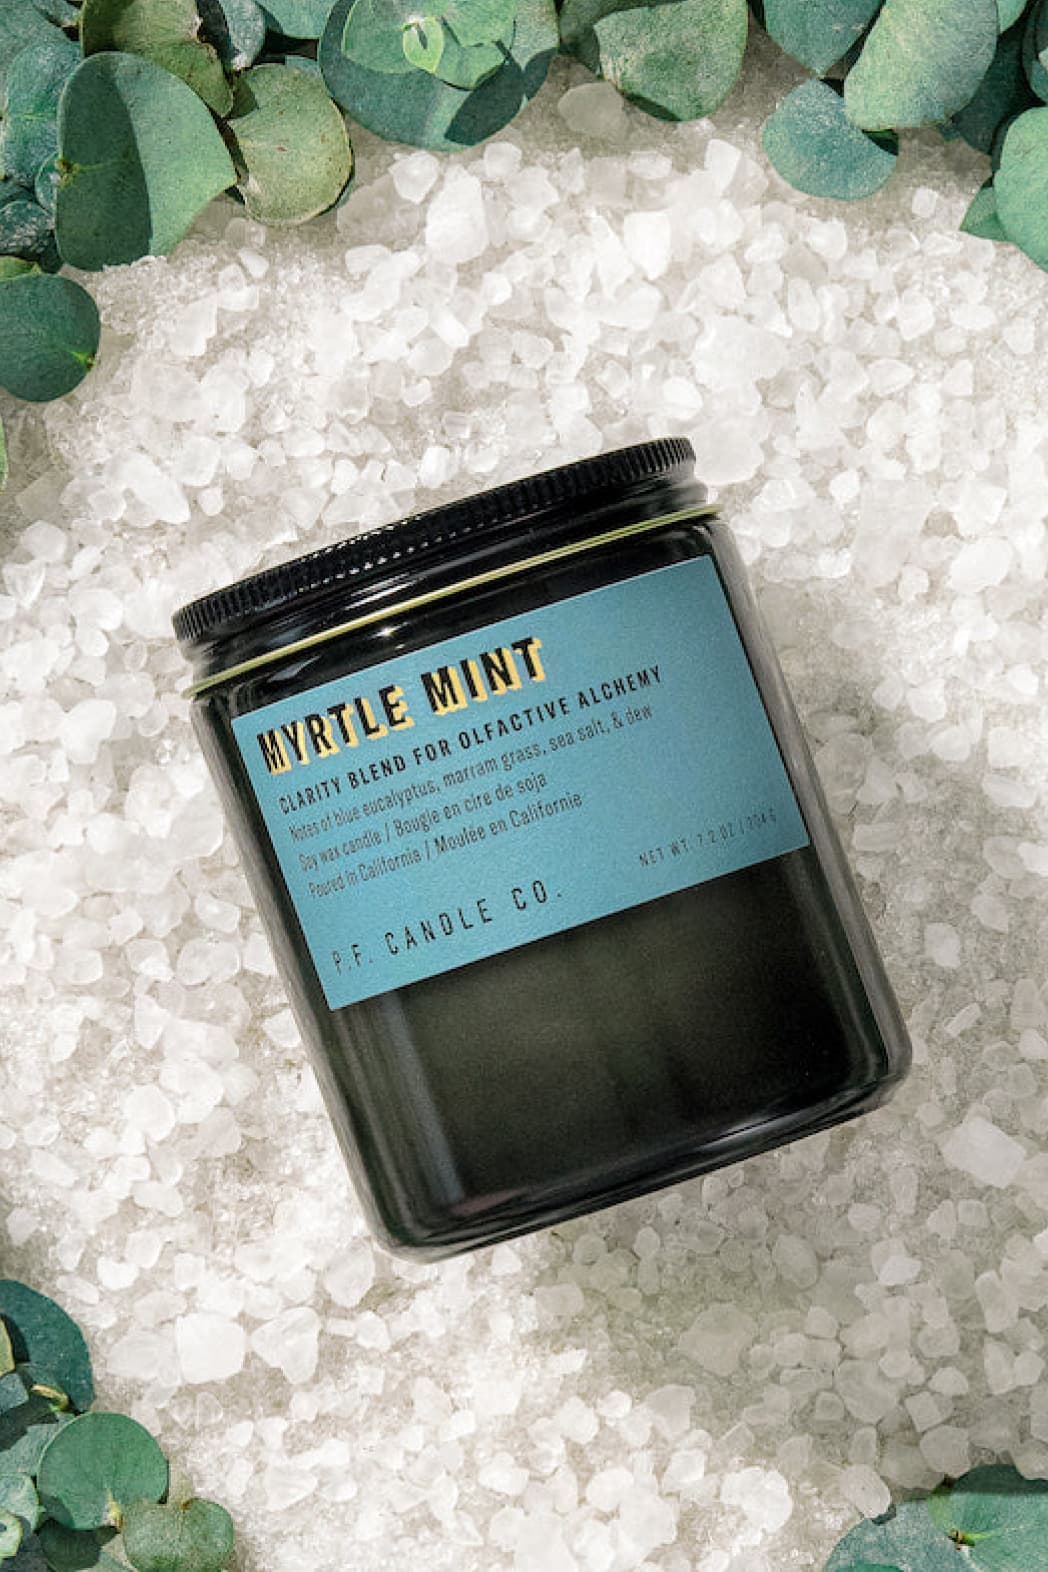 Myrtle Mint Soy Candle (Clarity & Focus) - Candle